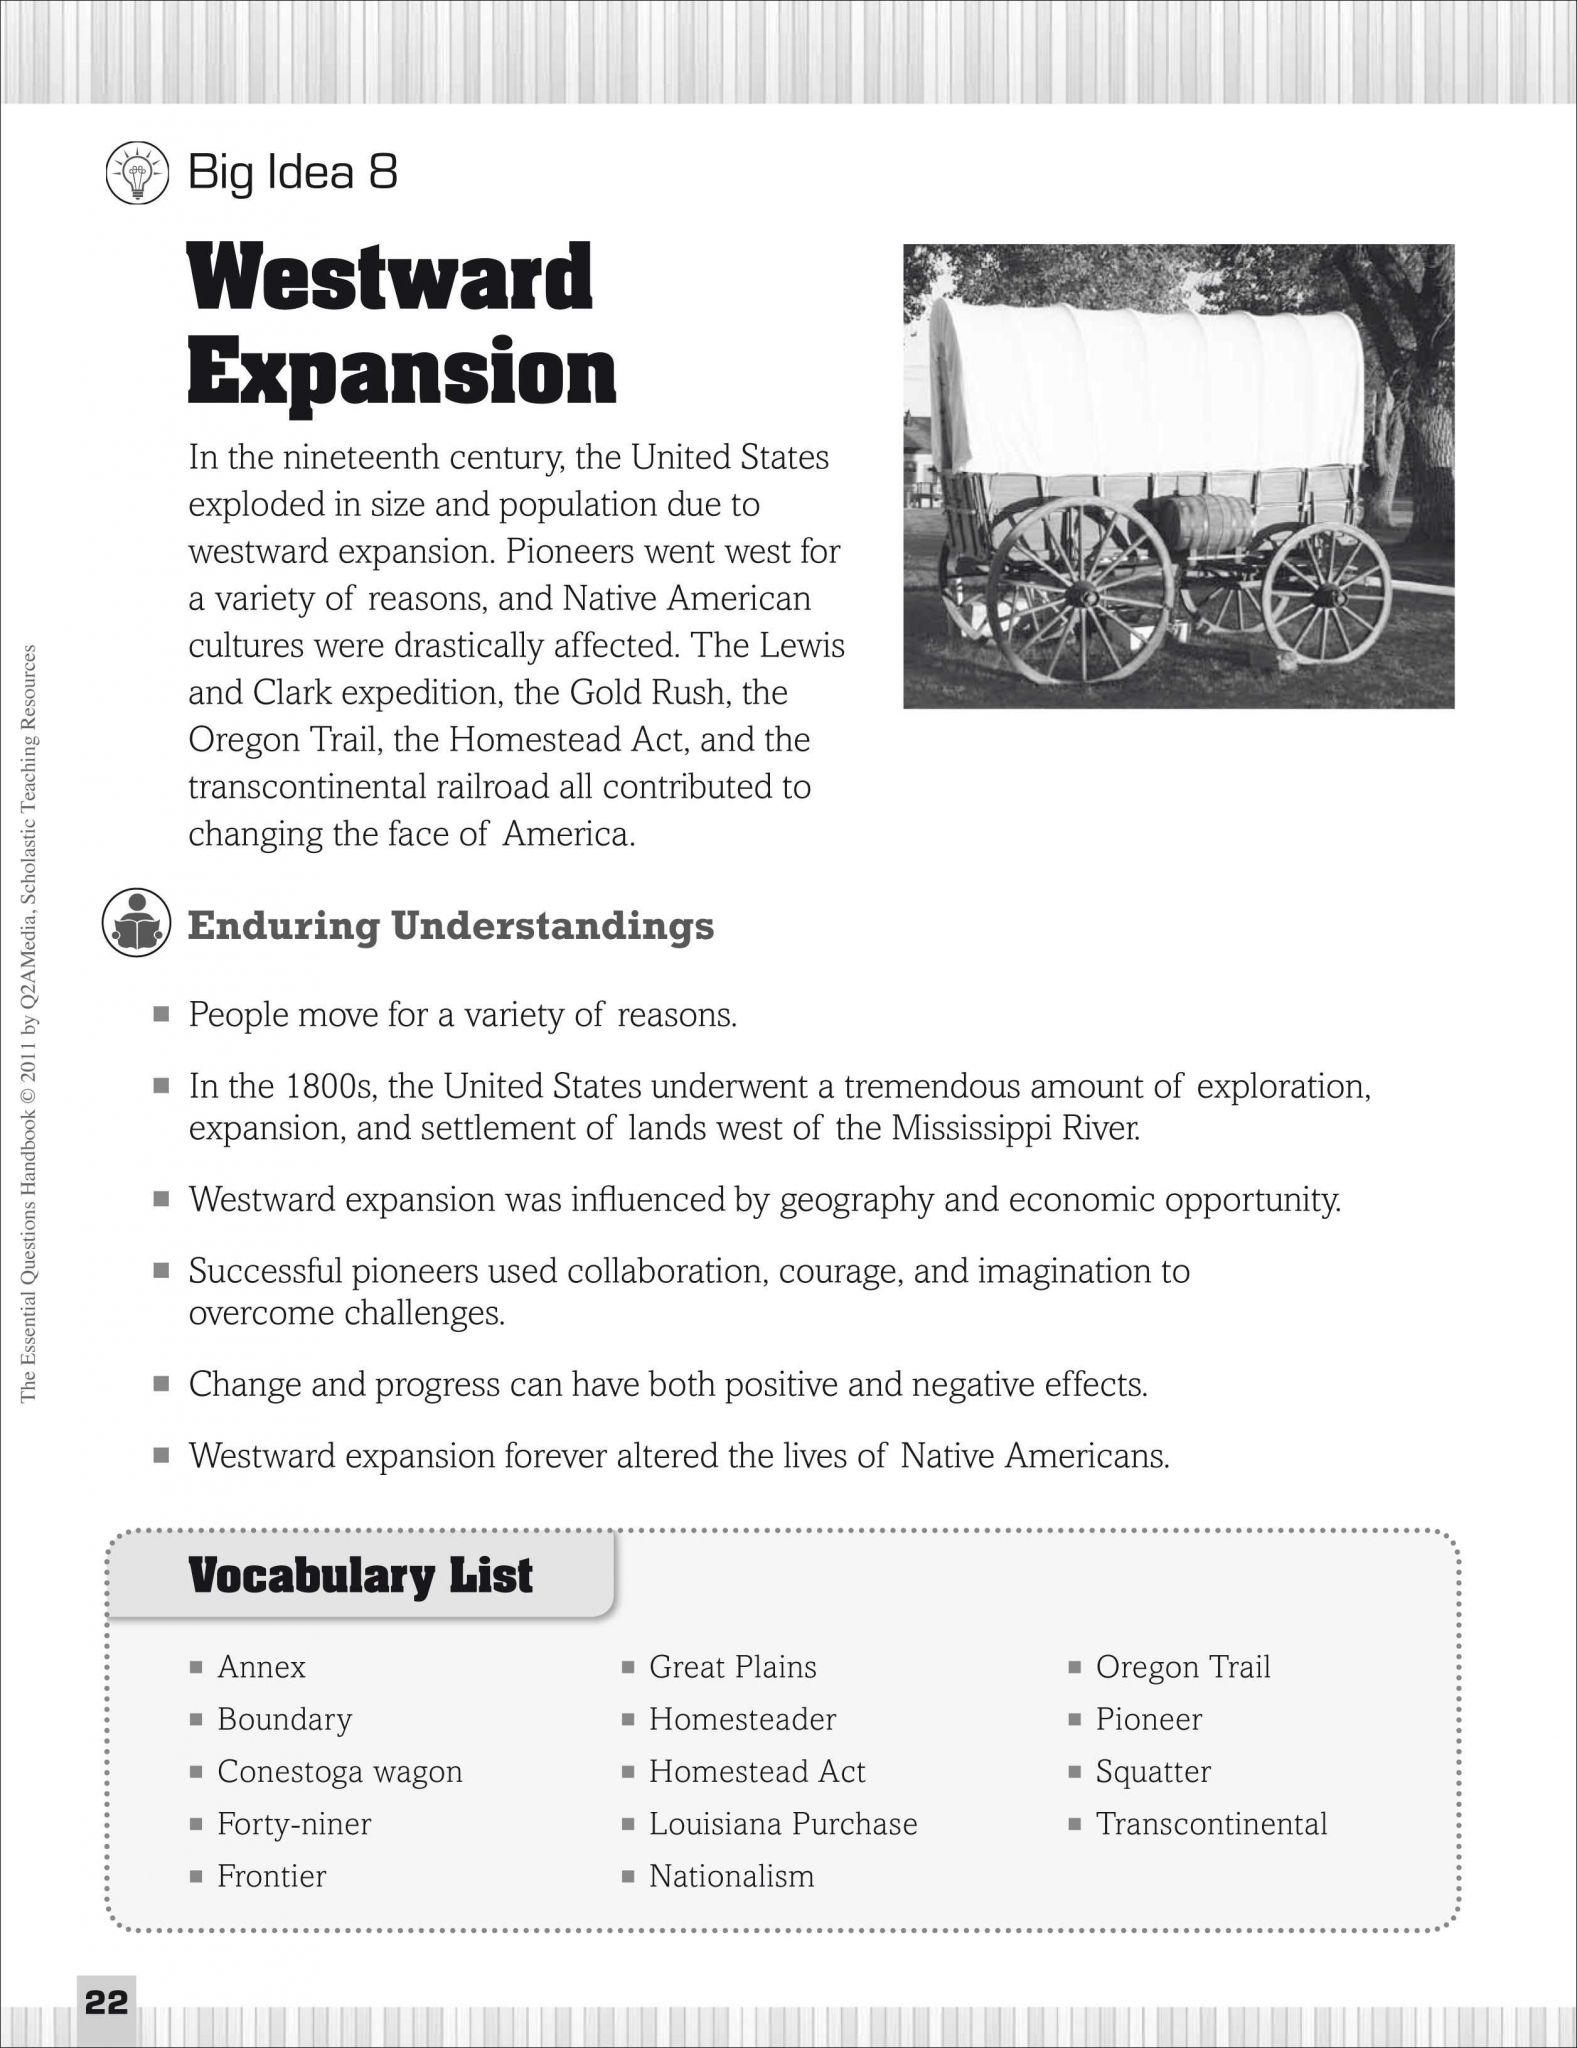 The Alamo Worksheet Answers Along with Westward Expansion Worksheets the Best Worksheets Image Collection